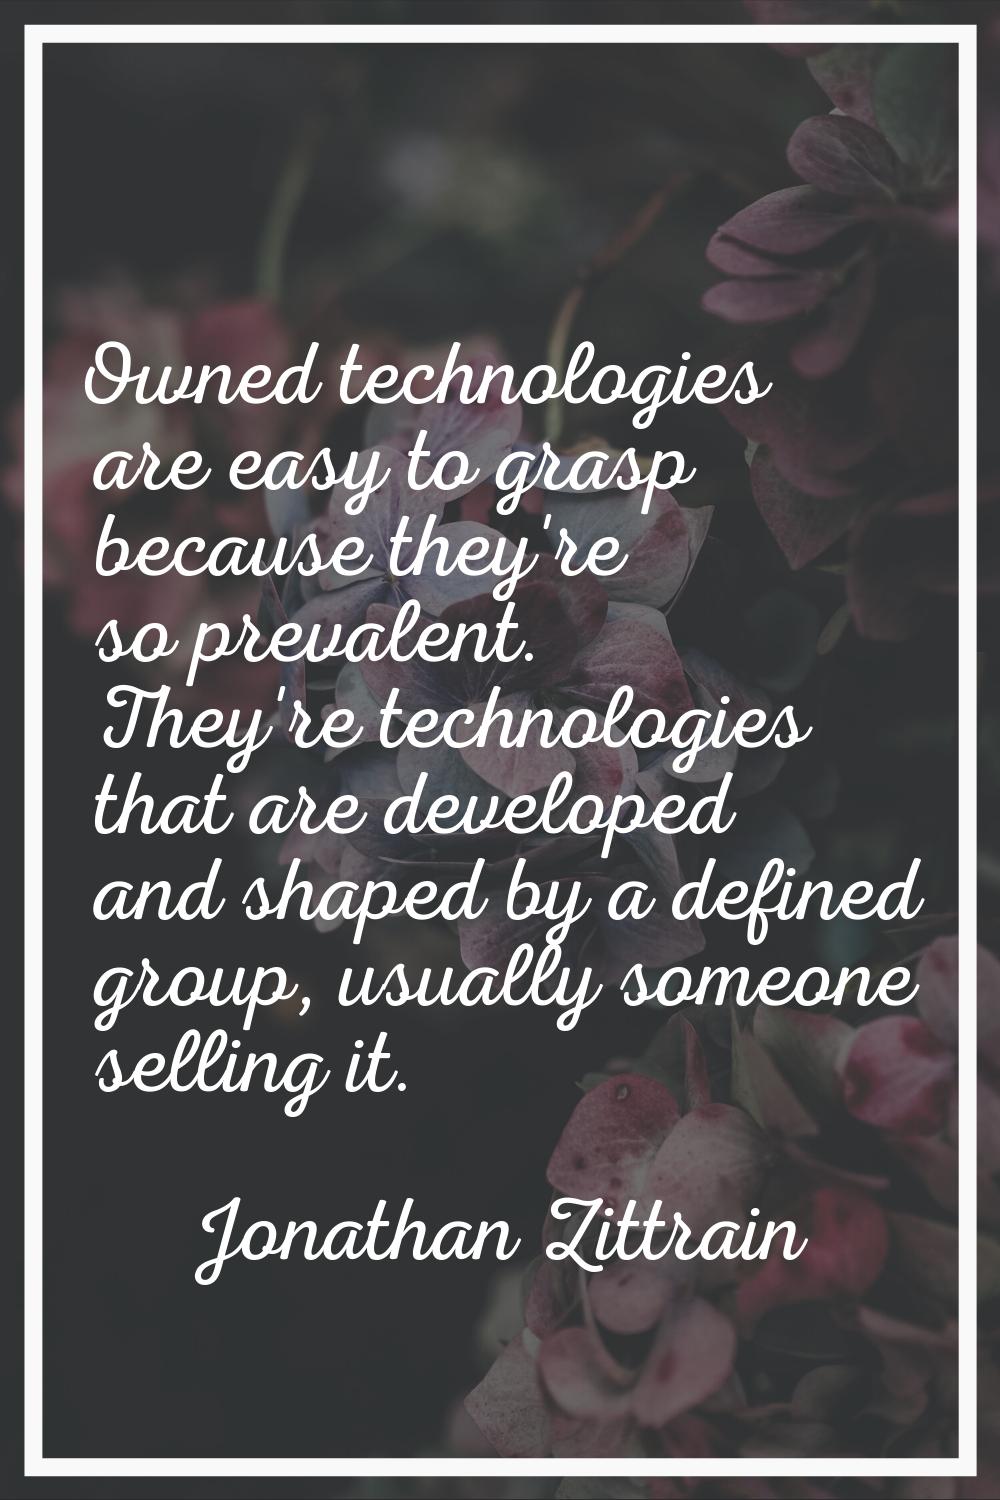 Owned technologies are easy to grasp because they're so prevalent. They're technologies that are de